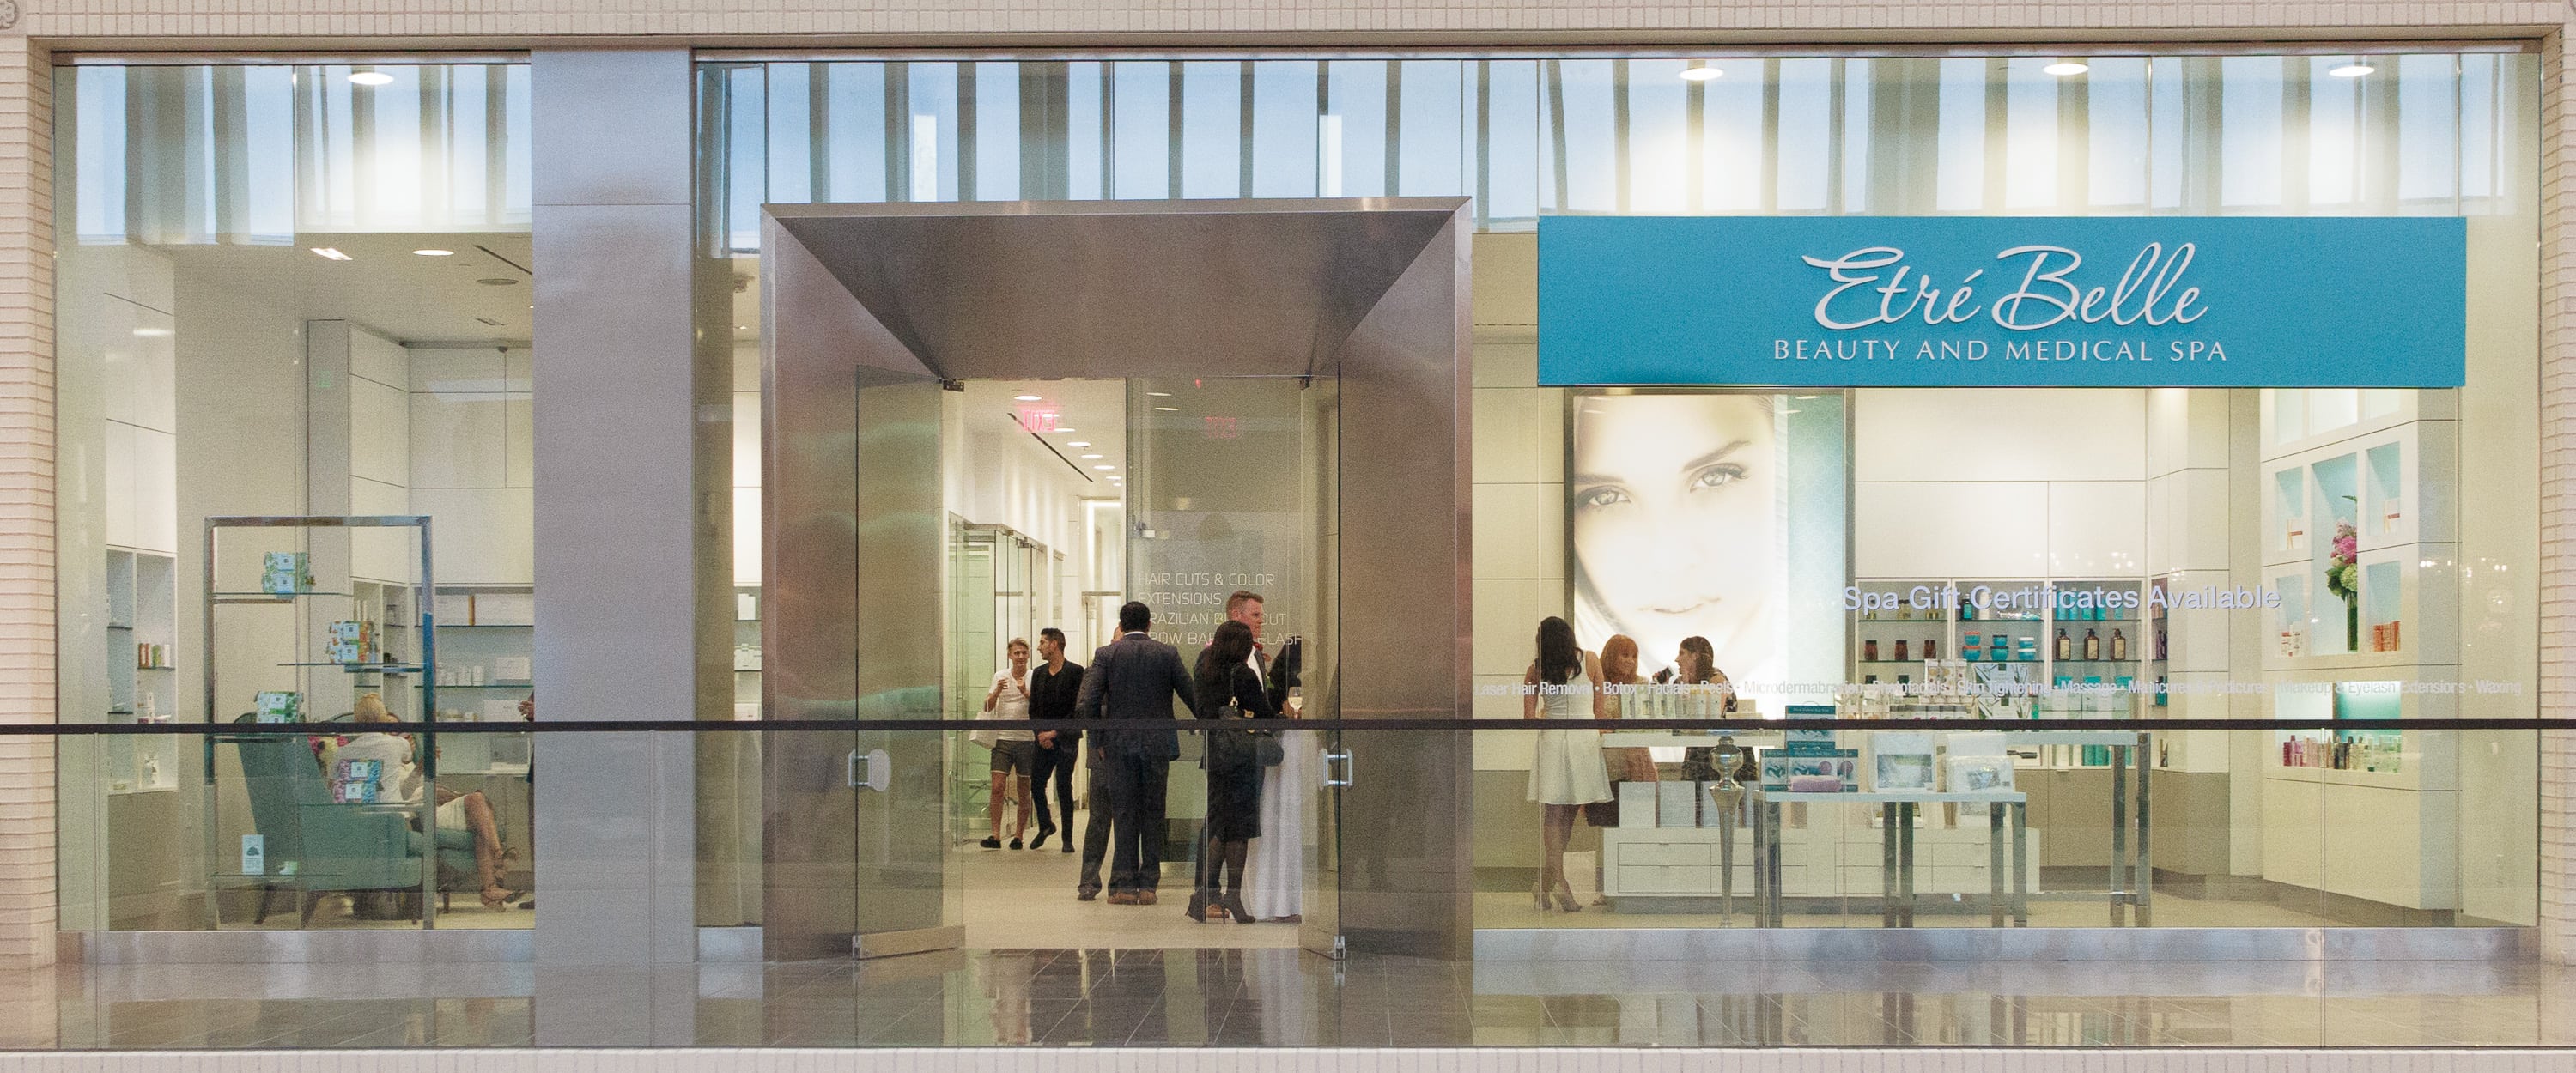 Neiman Marcus and Nordstrom. Northparkâ€™s newest premier luxury spa ...